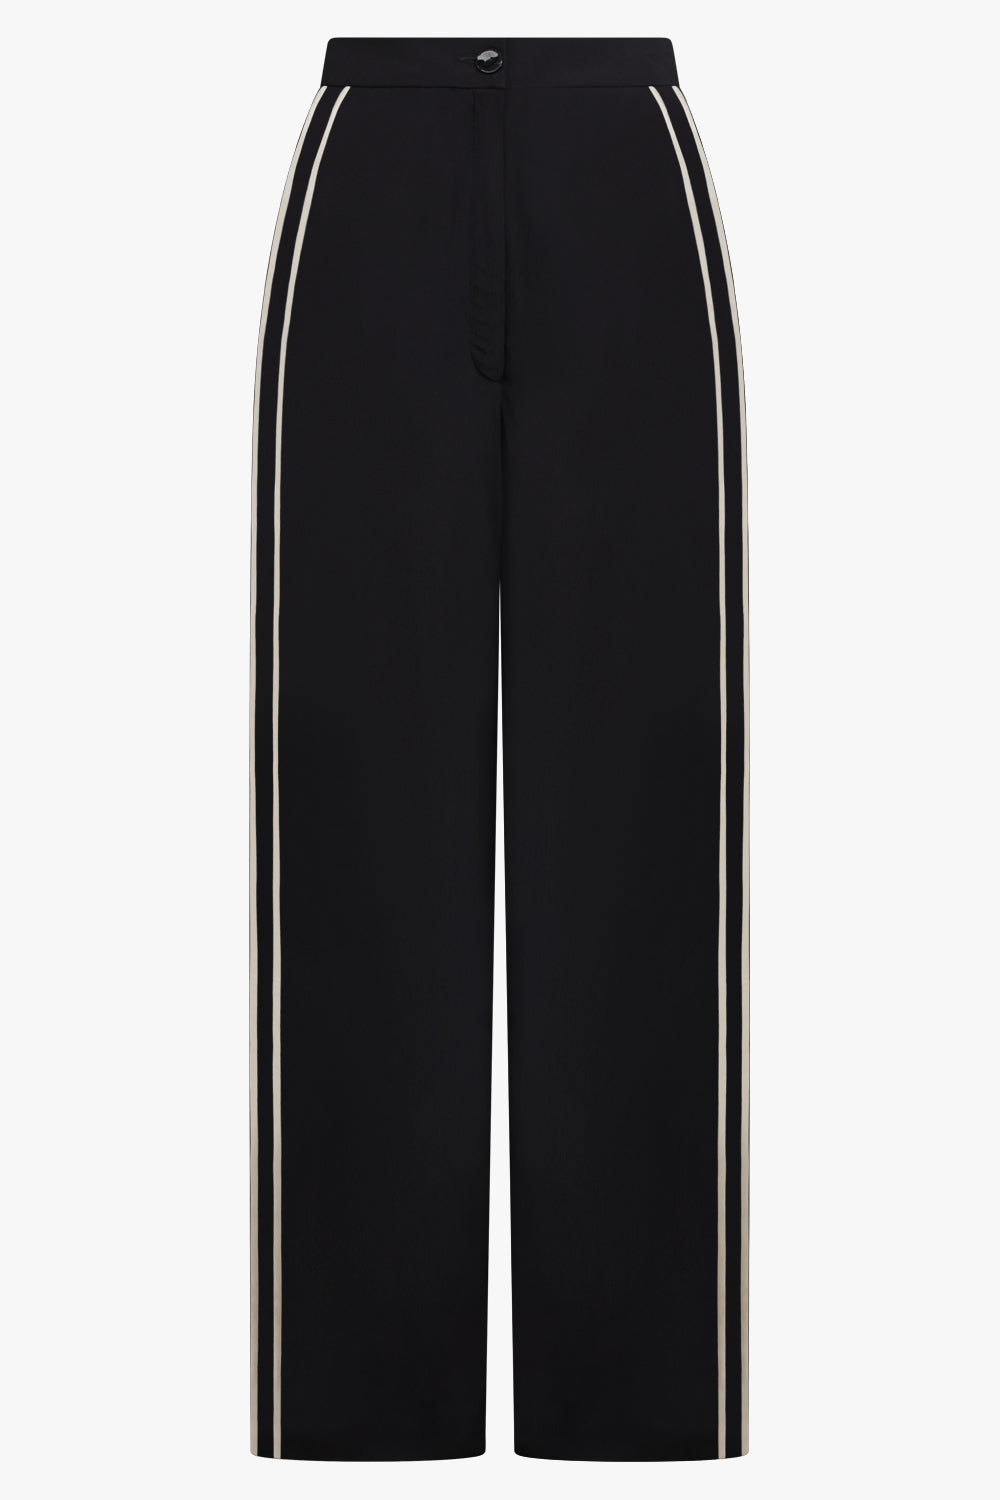 BODICE RTW CLASSIC TROUSERS WITH SIDE BINDING DETAILS | BLACK